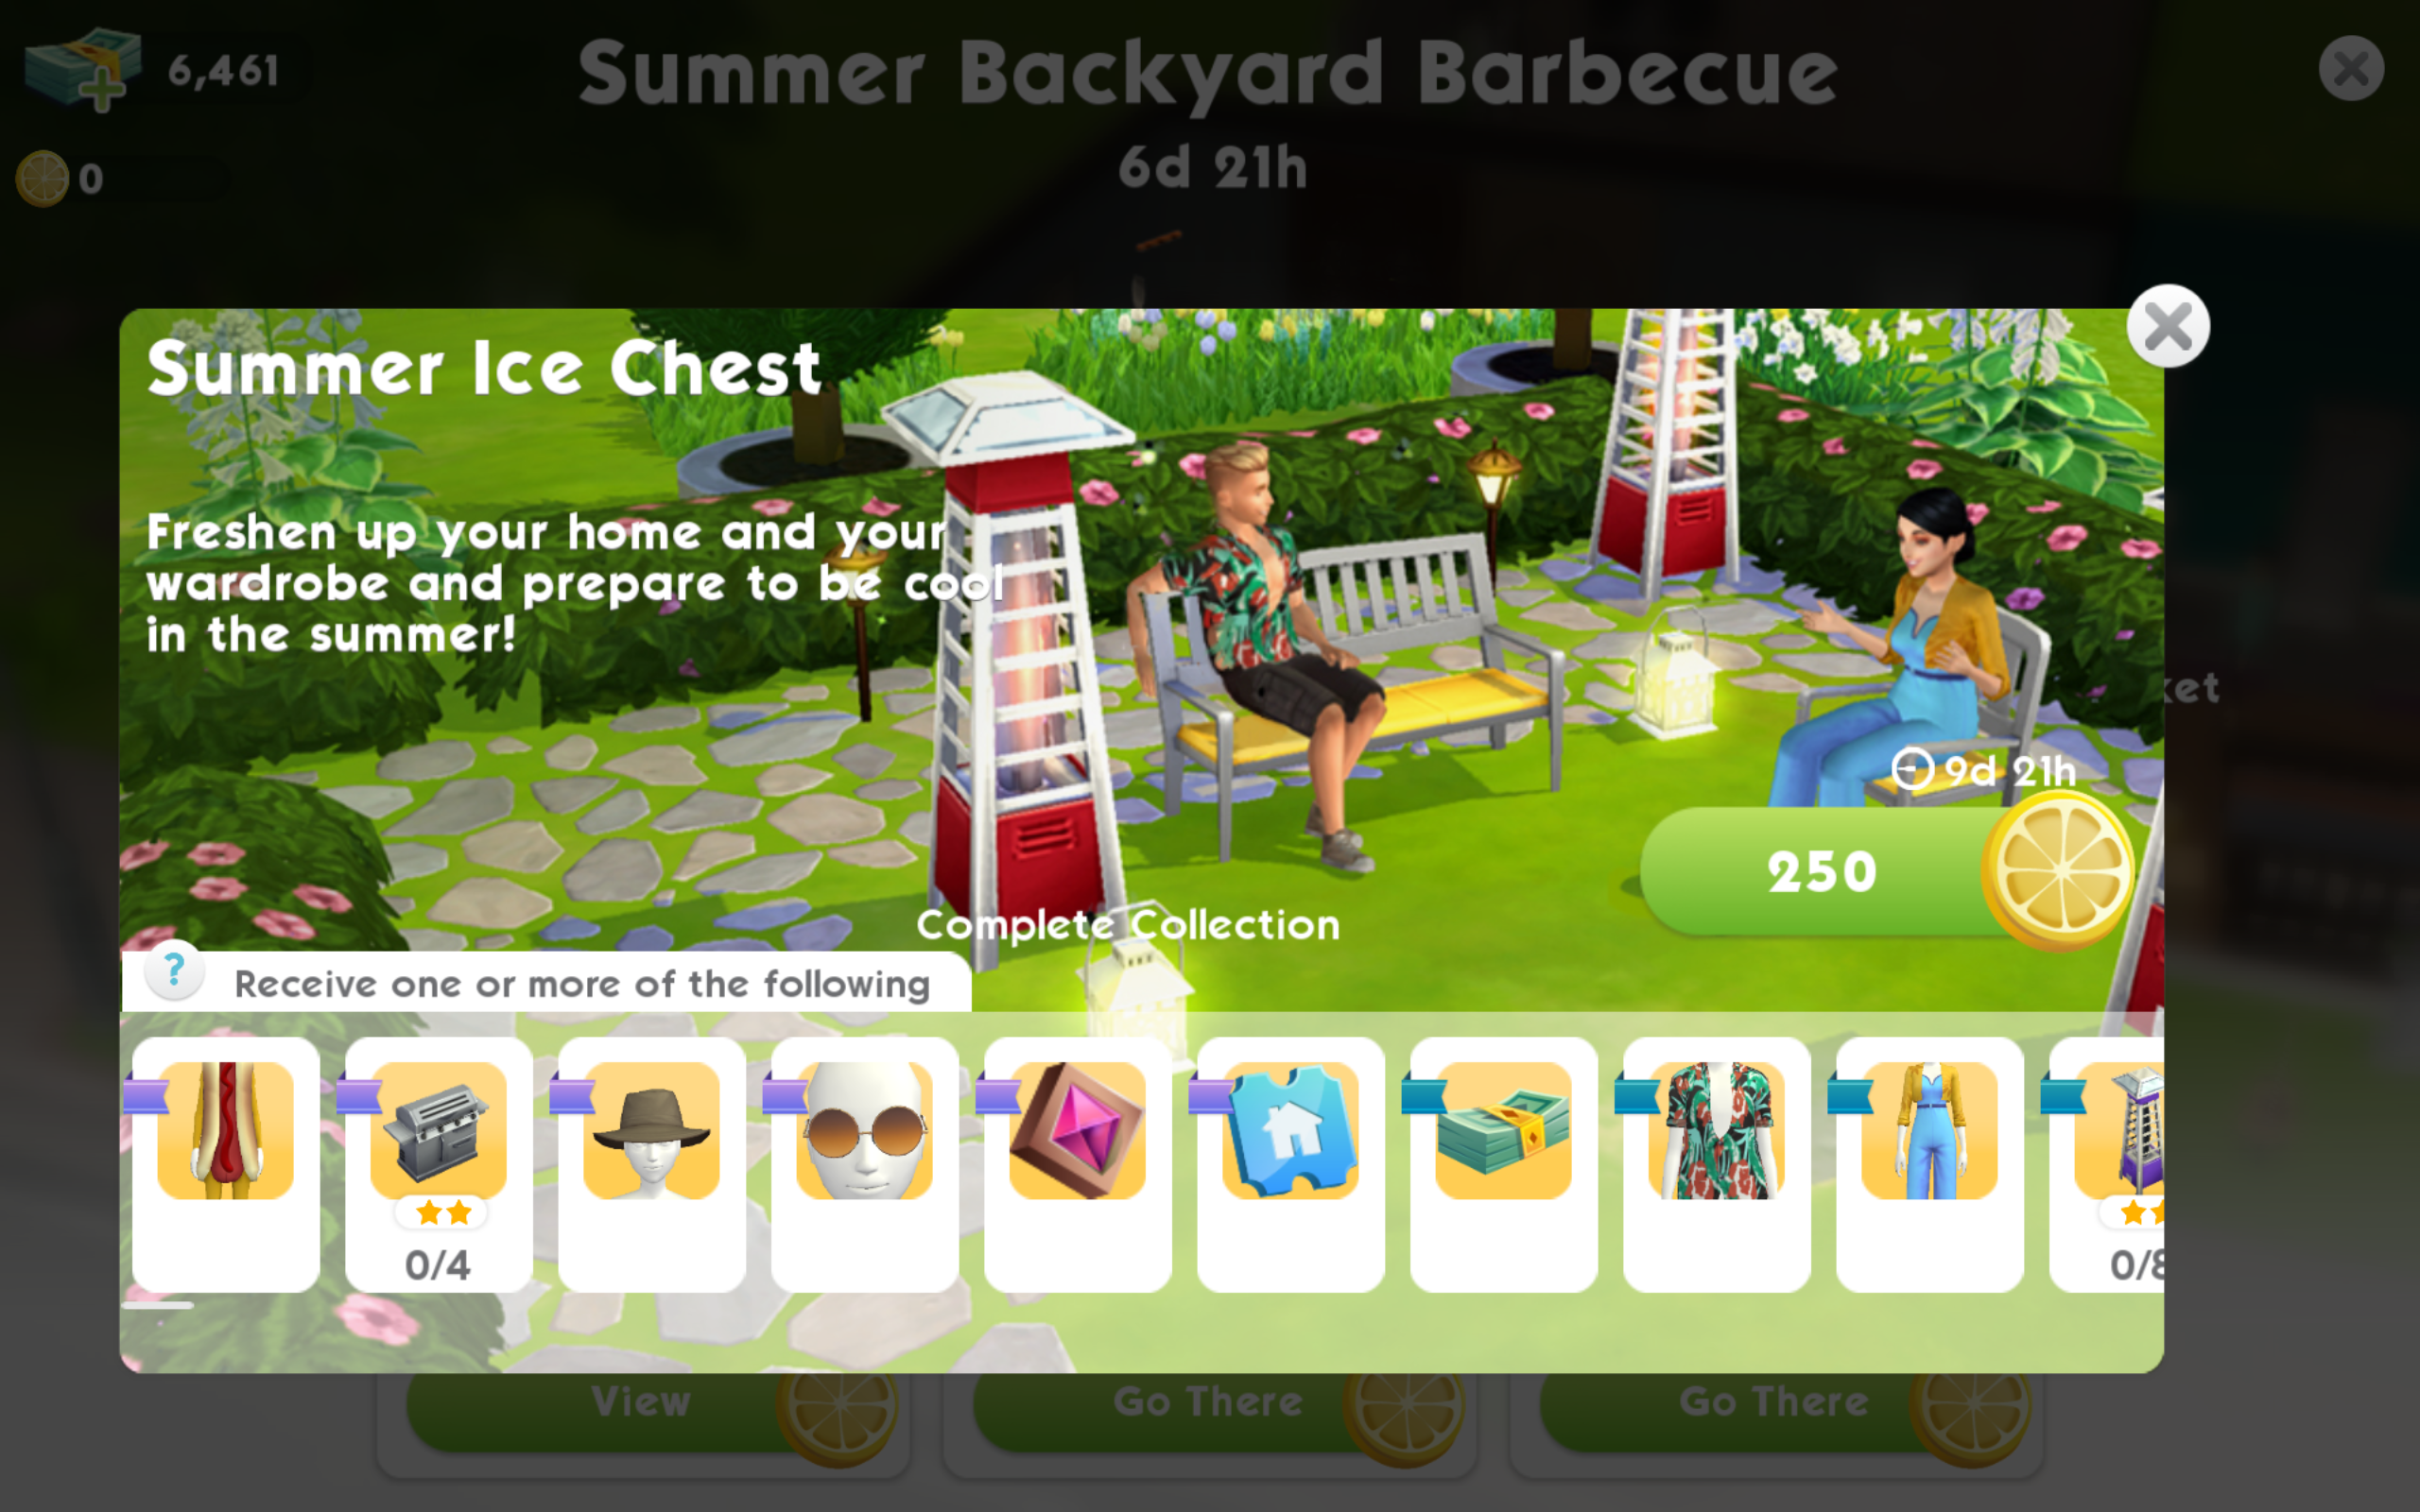 How To Complete The Summer BBQ Event Garden Gnomes In The Sims